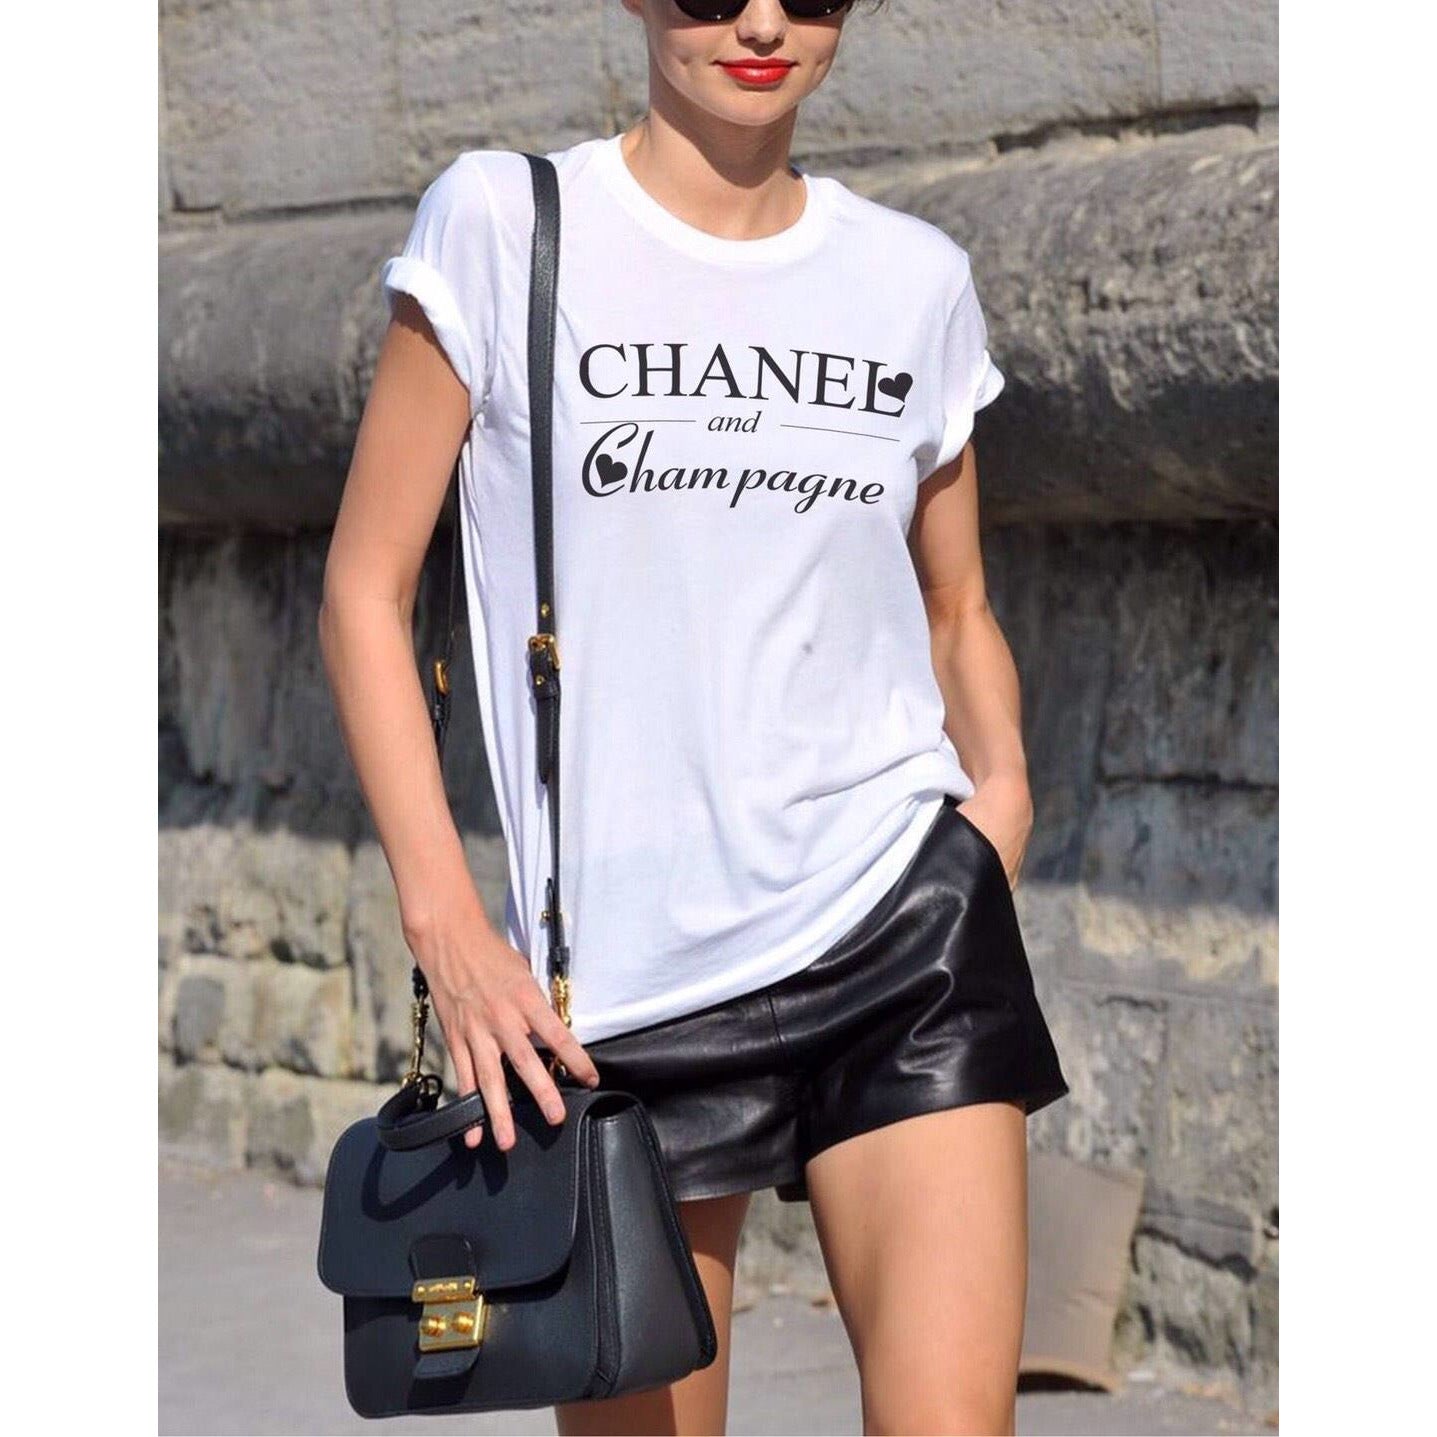 Chanel T-shirt - Shop for Chanel T-shirt on Wheretoget